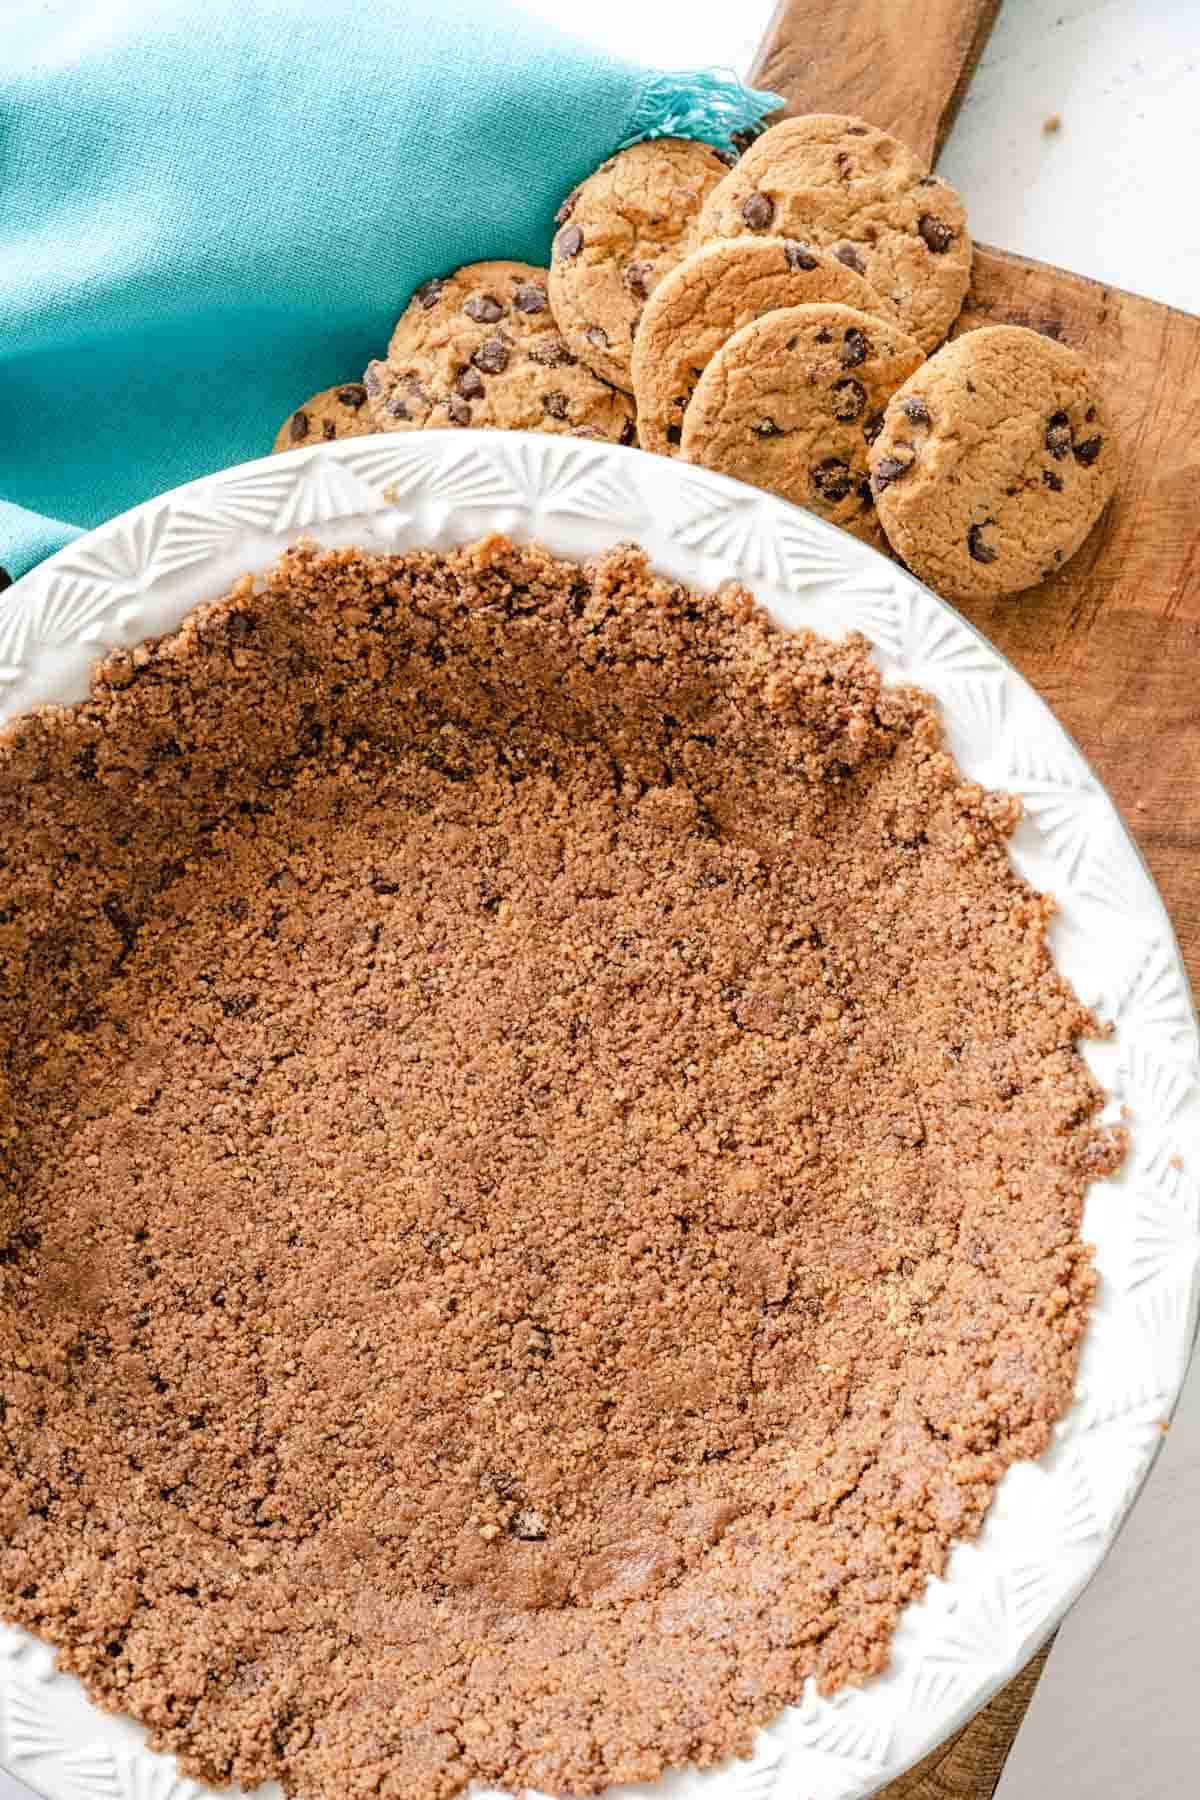 Chocolate Chip Cookie Crust in a white pie plate.